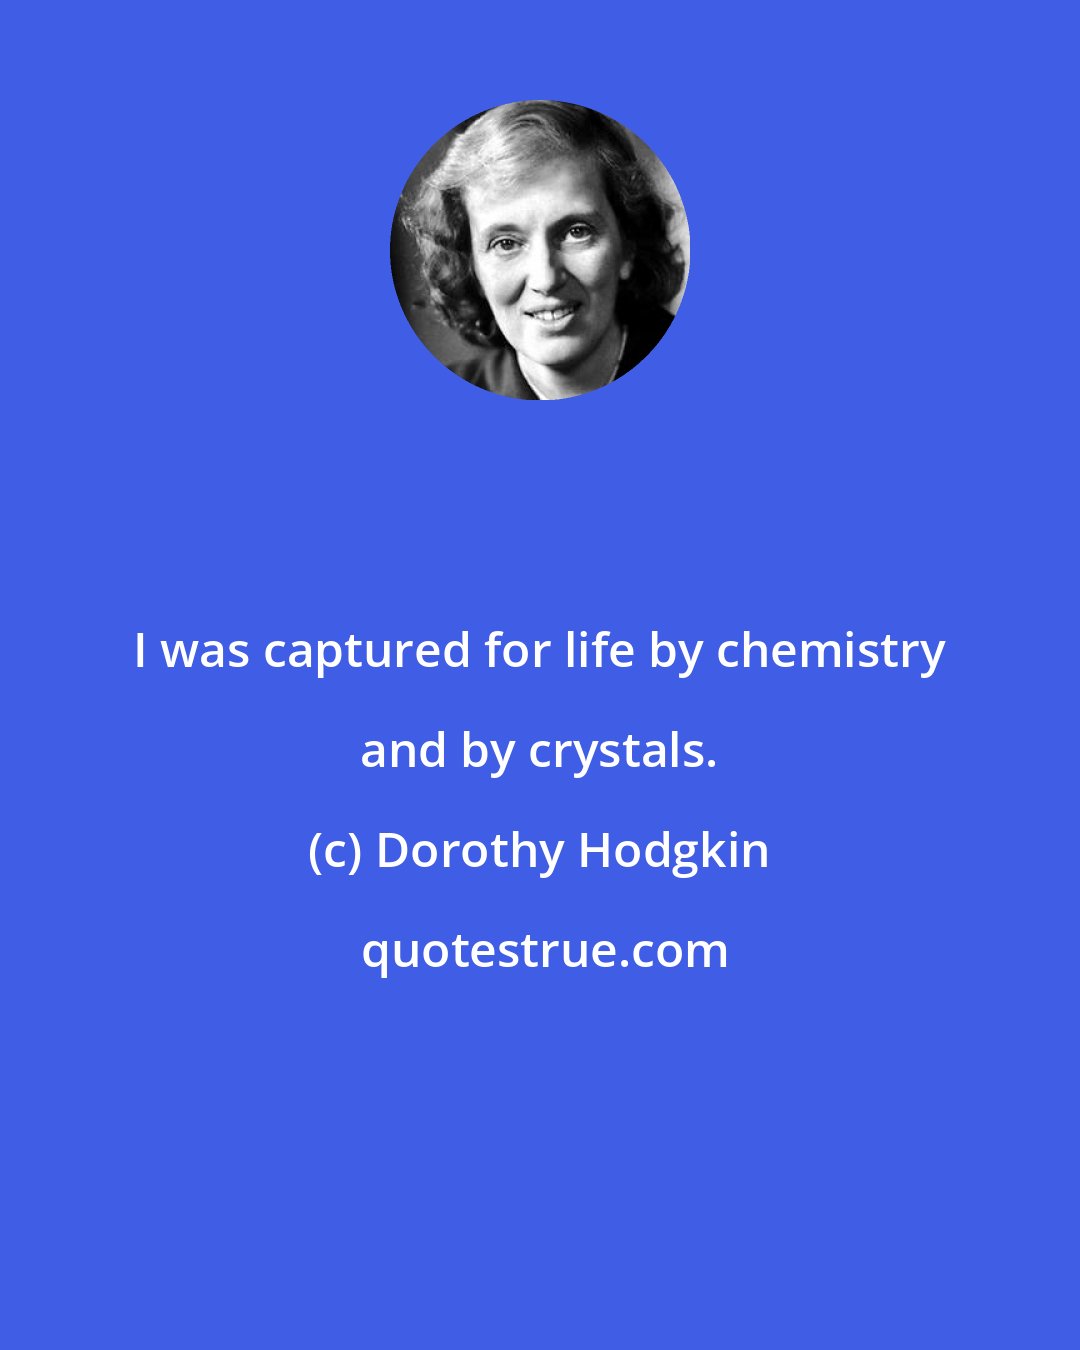 Dorothy Hodgkin: I was captured for life by chemistry and by crystals.